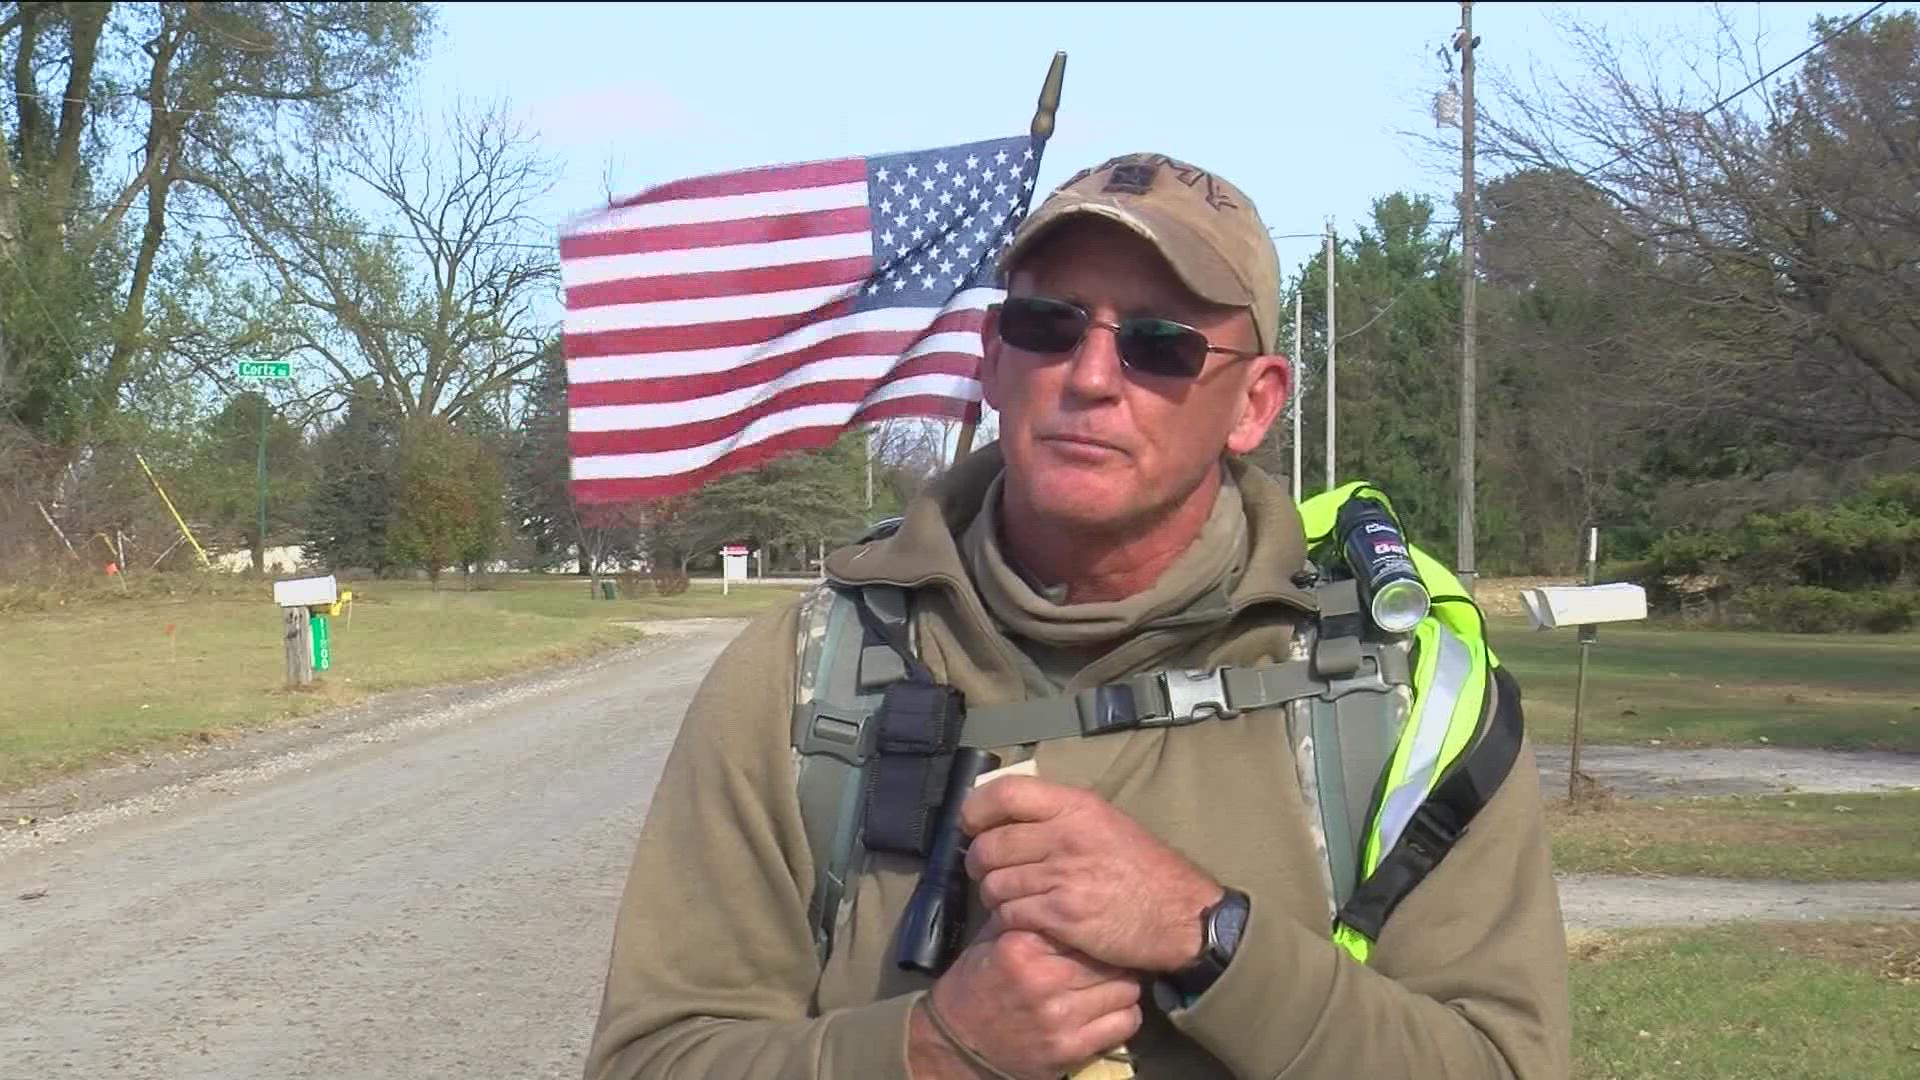 Kelly Haskin is making the trek across state lines with a military backpack as part of the Ruck March, and to raise money for the Stop Soldier Suicide program.